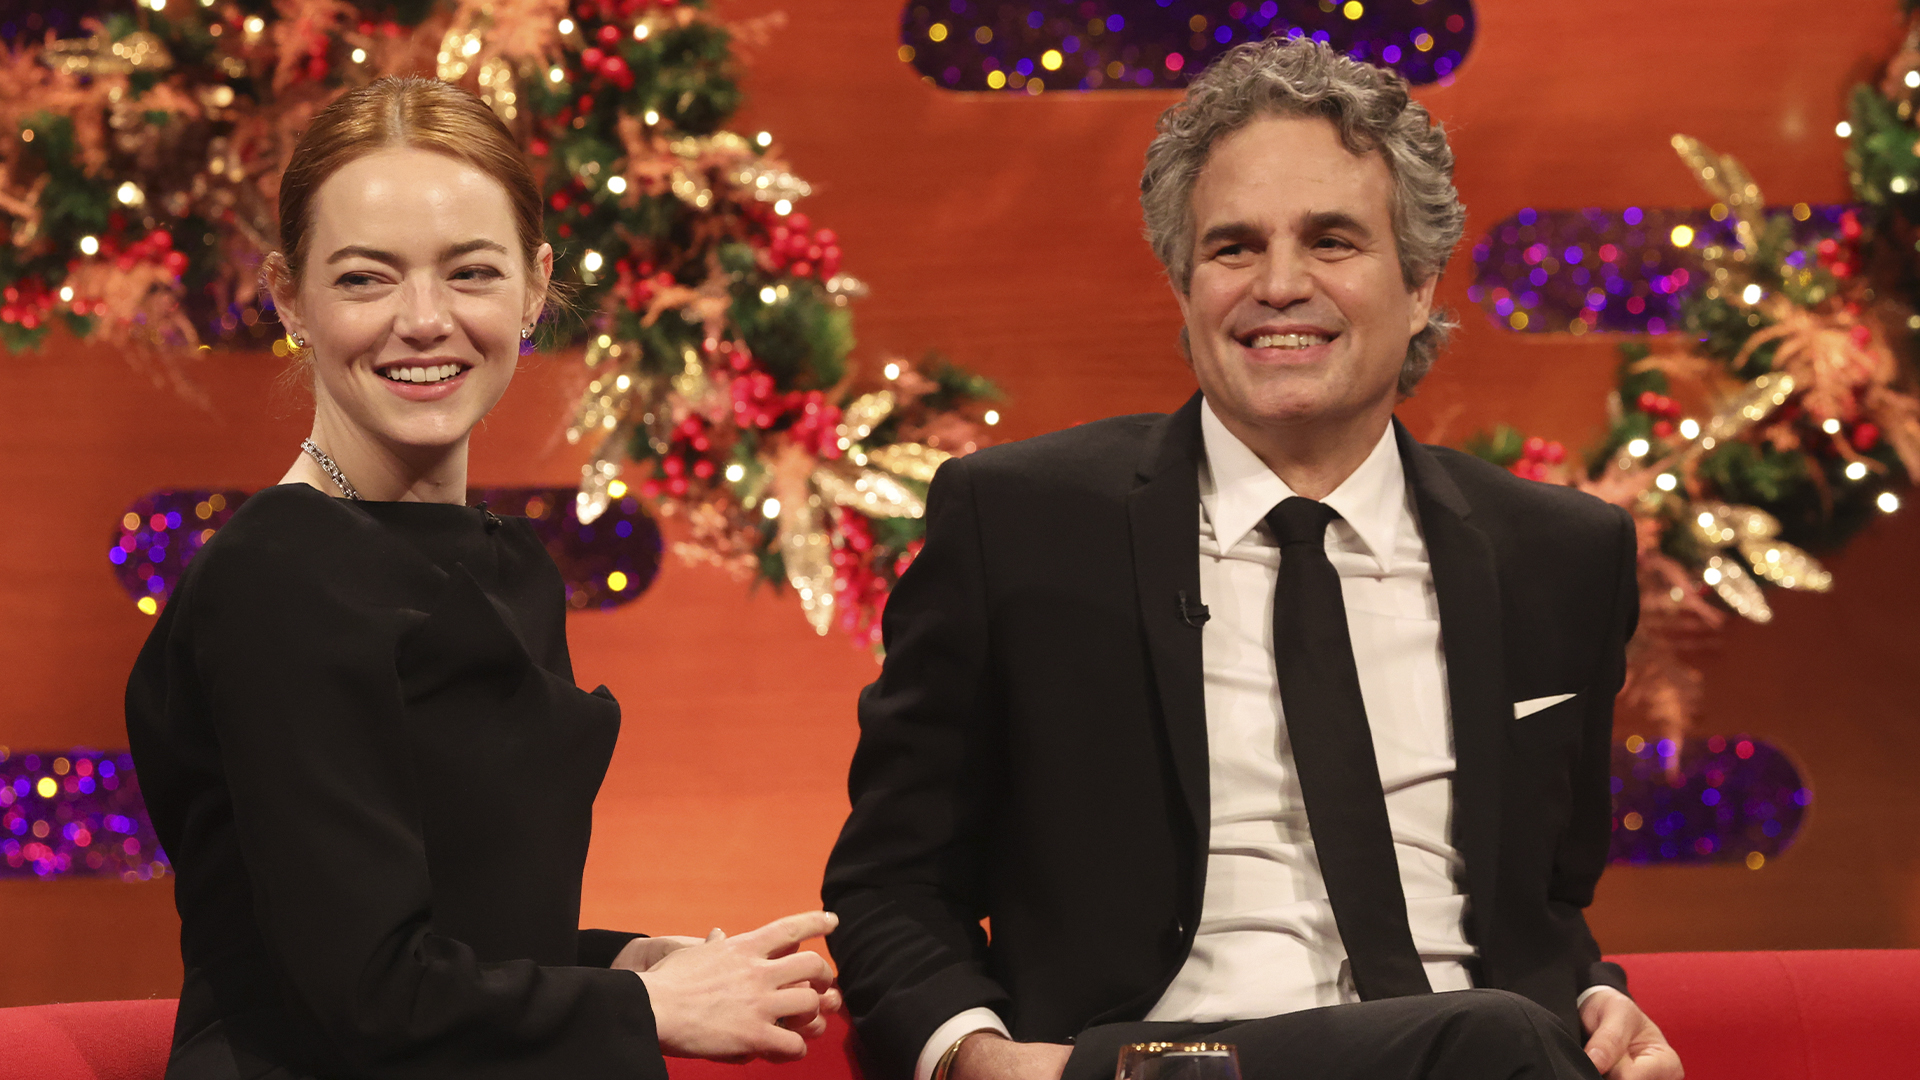 New Year's Eve Special, The Graham Norton Show features Graham trading quips with Emma Stone, Mark Ruffalo, Claudia Winkleman, Rob Brydon, and Ezra Collective., Season 1064325, Episode 99